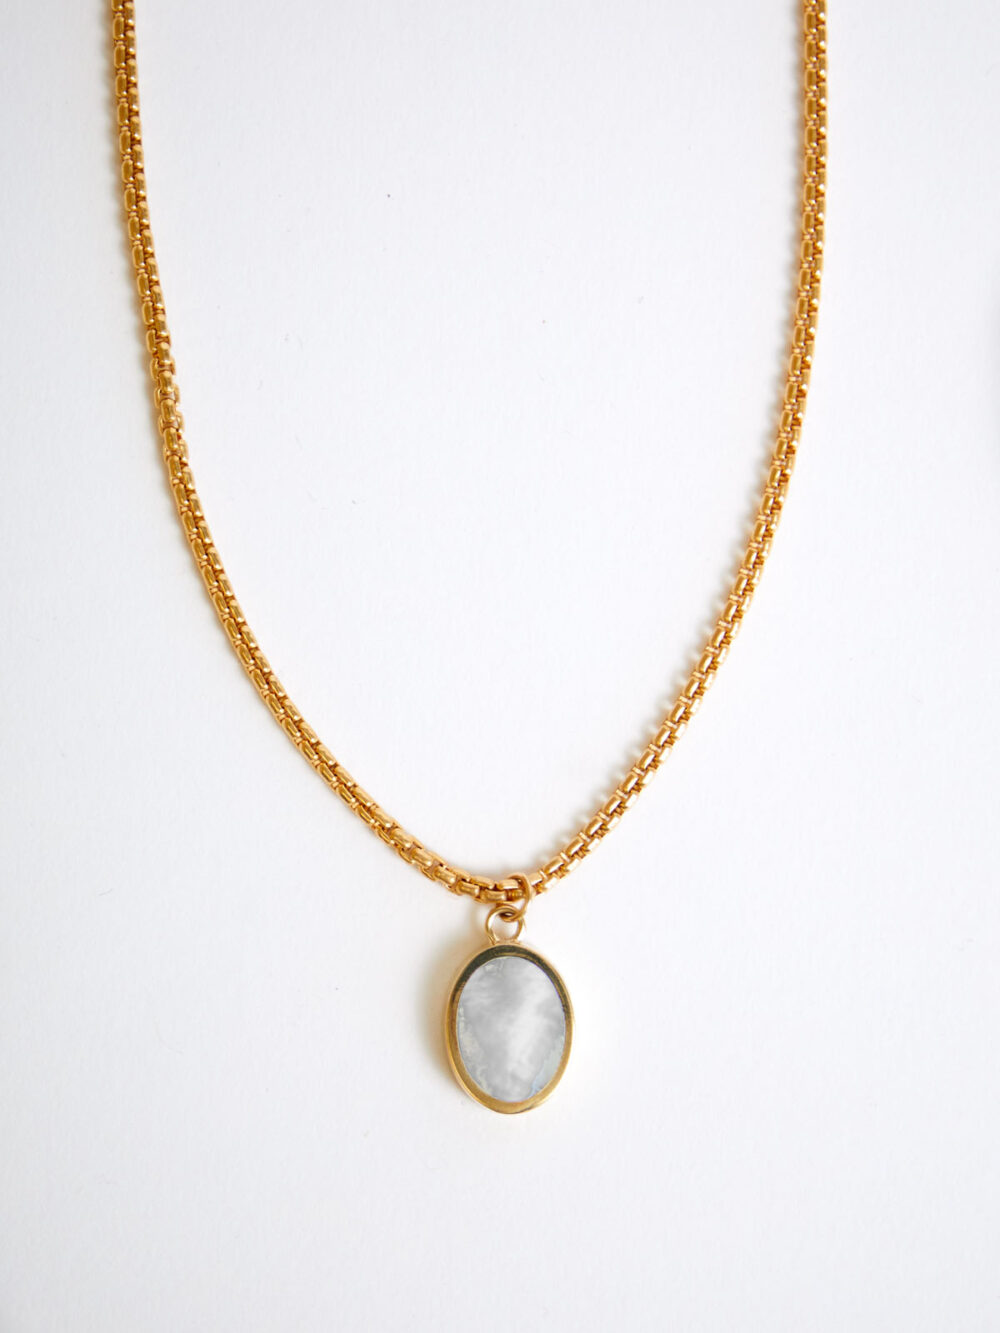 14K Mother of Pearl Oval Pendant Necklace by Legier